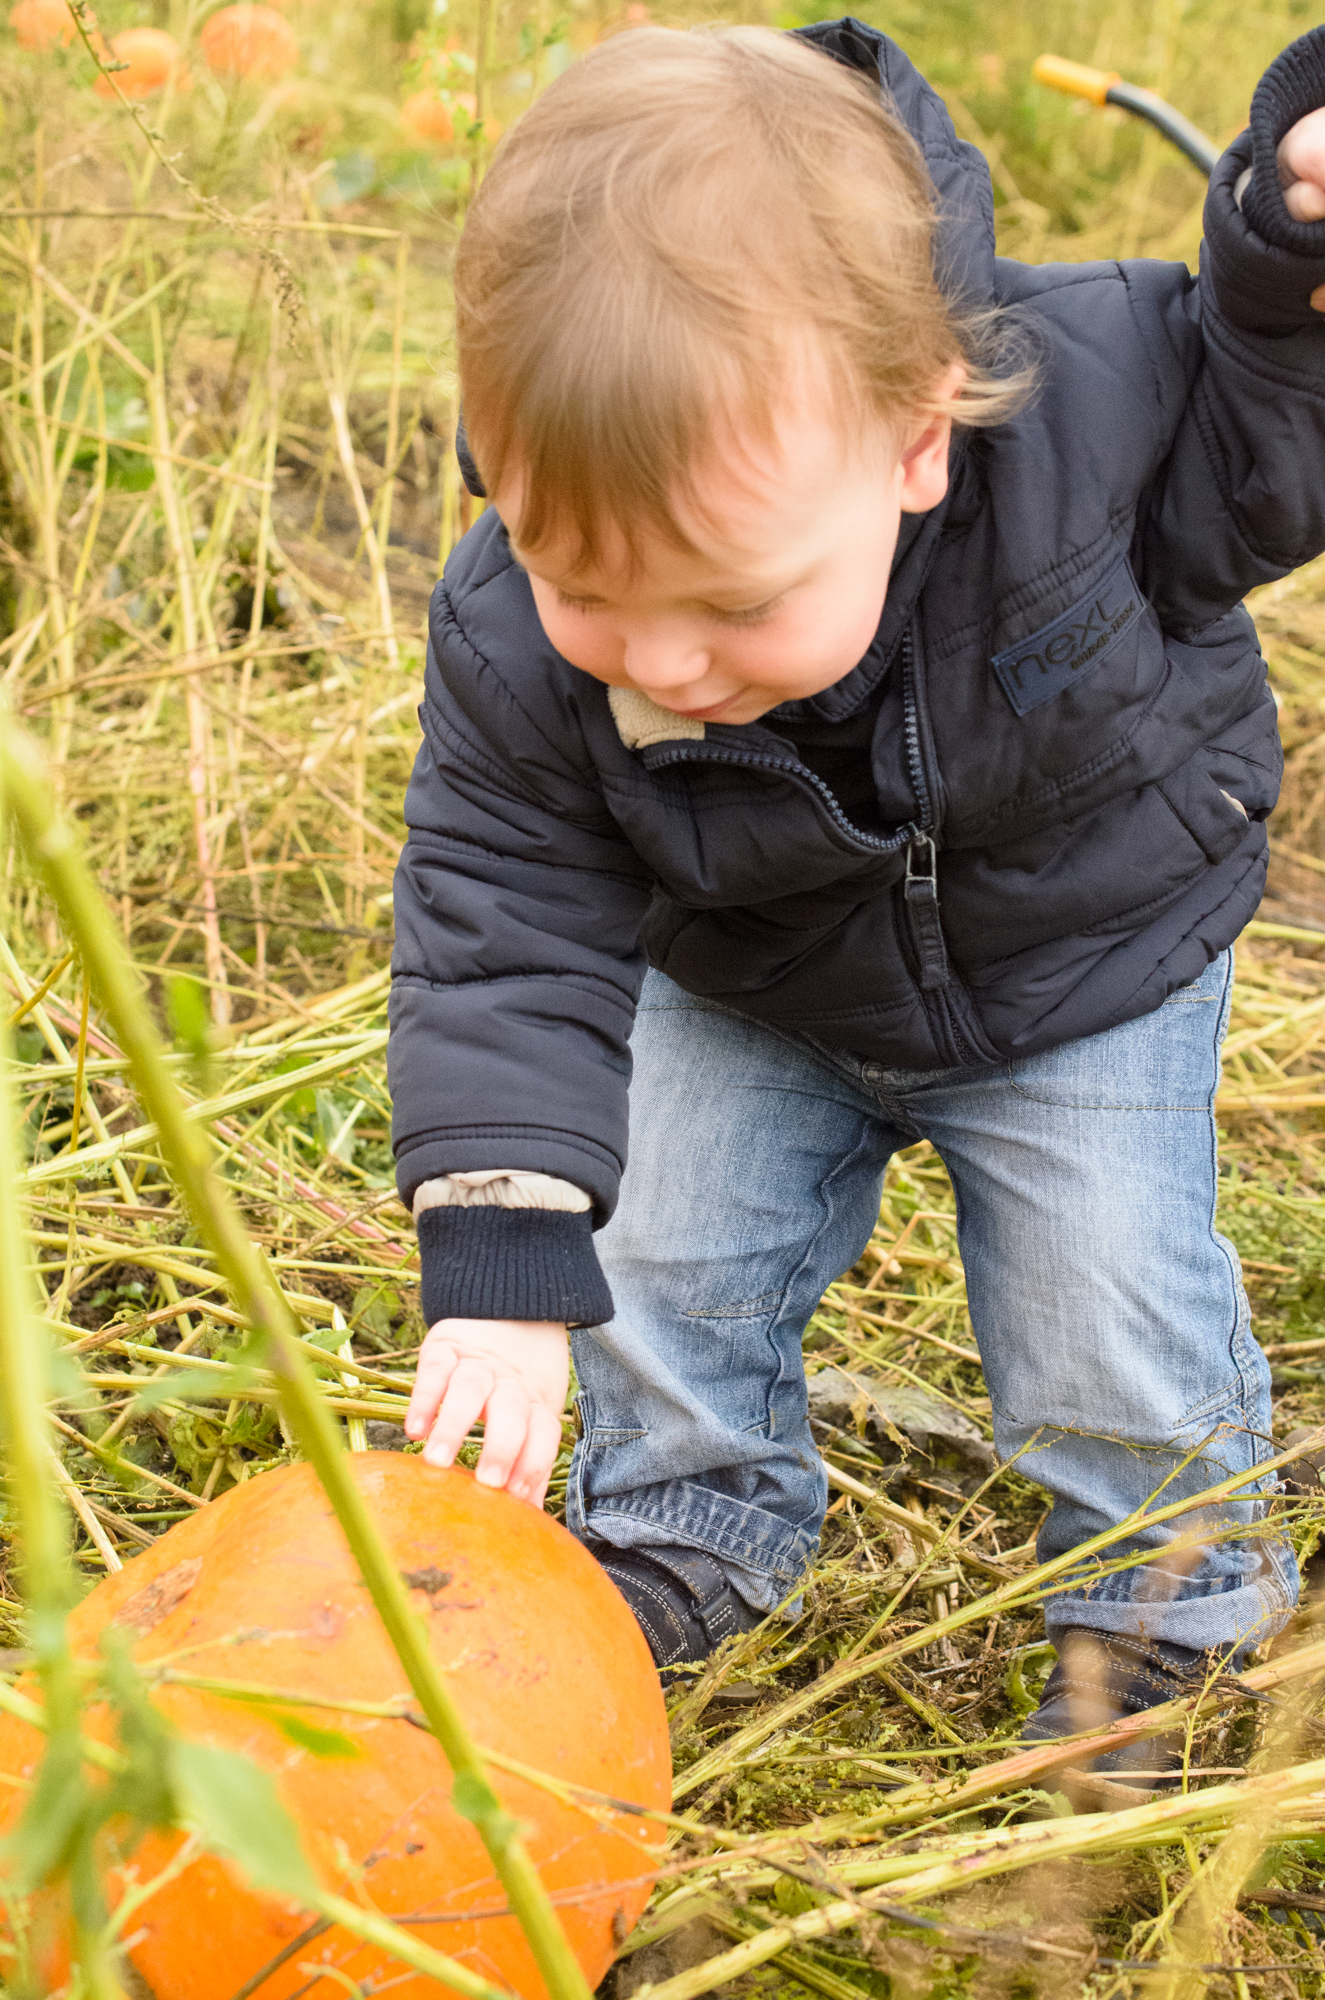 Discovering the pumpkins